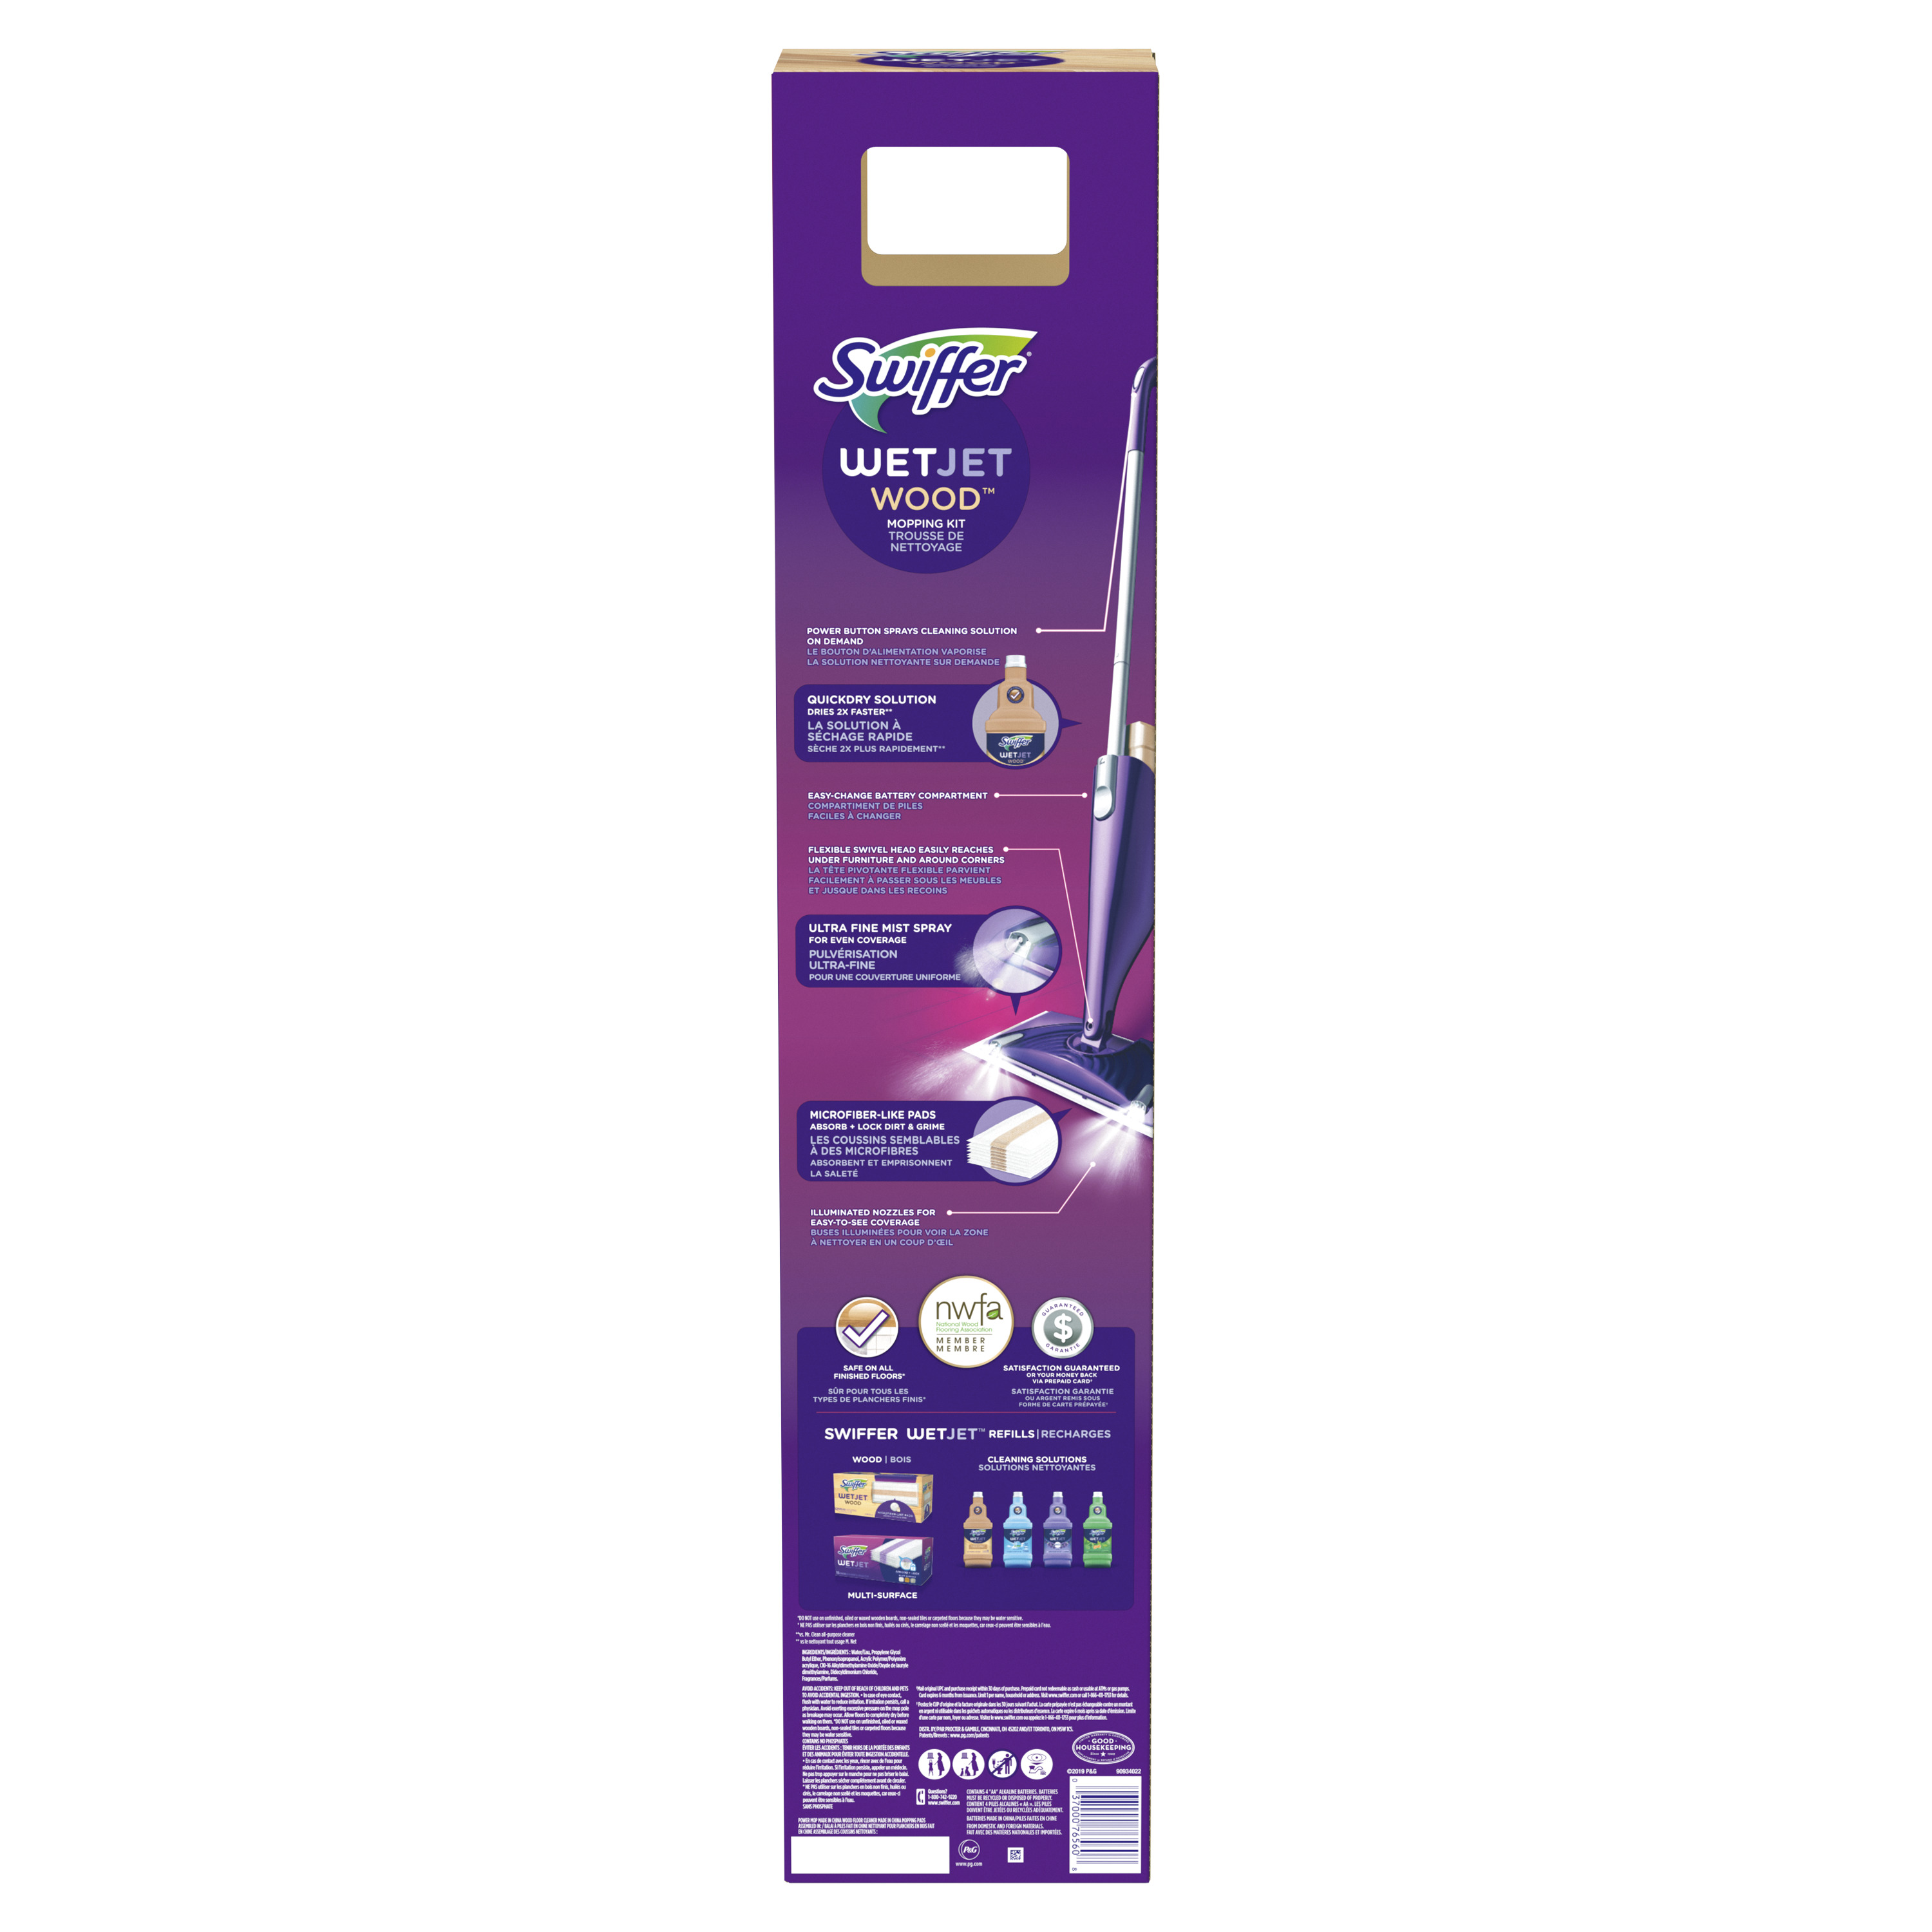 Swiffer WetJet Wood Mop Kit (1 Spray Mop, 5 Mopping Pads, 1 Cleaning Solution) - image 10 of 12